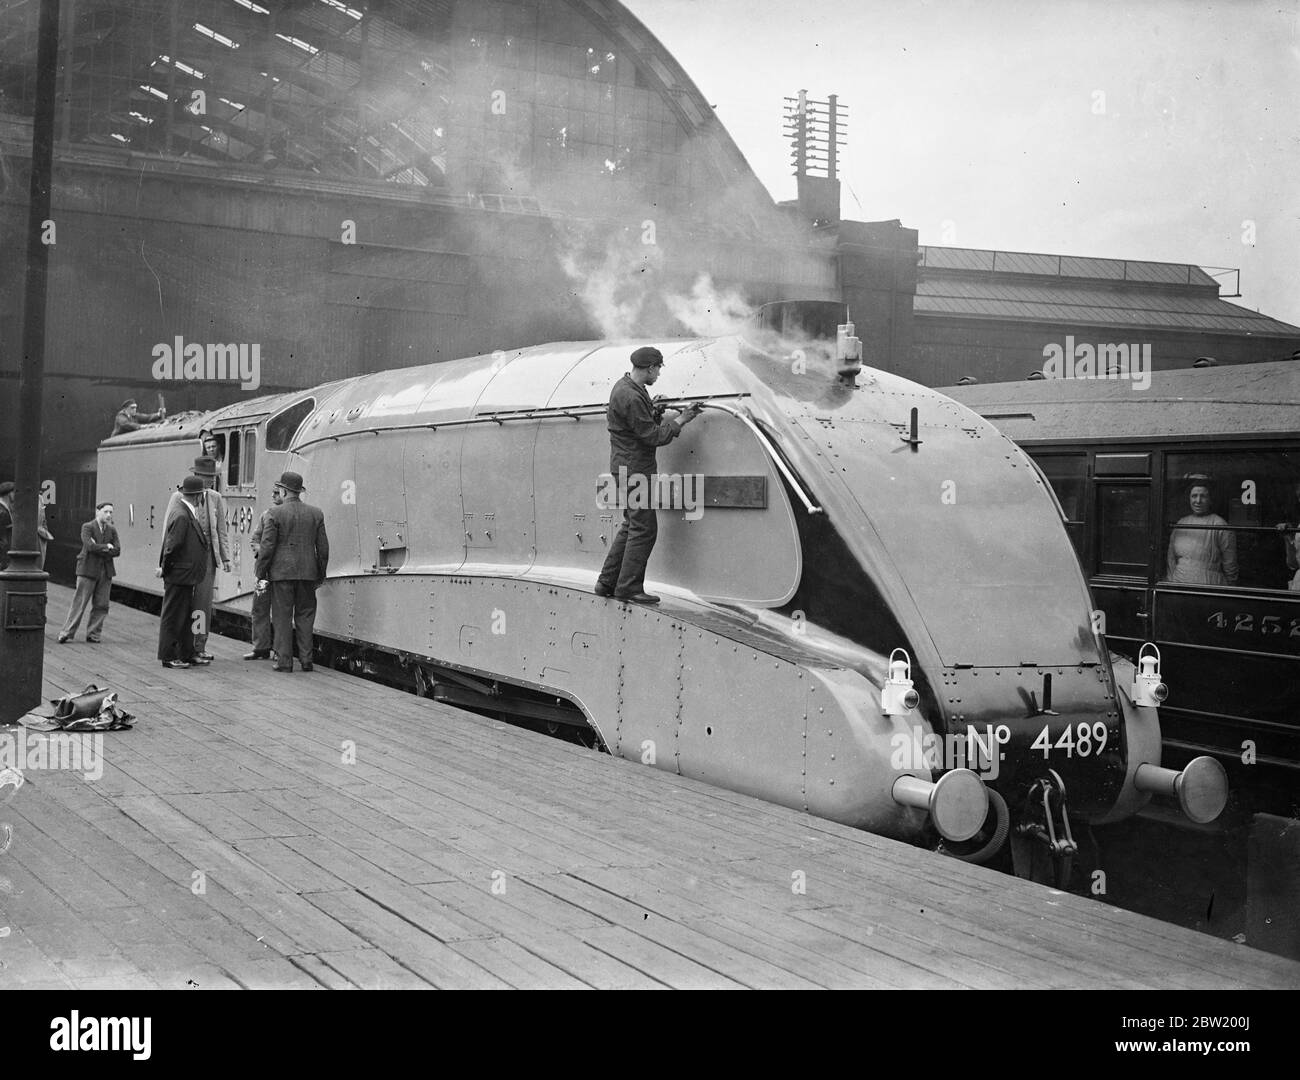 Empire's fastest streamlined train arrives at King's Cross. The first of the L. N. E. R.'s special streamlined engines, built for the Coronation streamlined express to run between King's Cross and Edinburgh, arrived at King's Cross Station to be named Dominion of Canada by the High Commissioner for Canada, the Hon. Vincent Massey. The down train, on its run between London and York, will be the fastest train in the British Empire, averaging 71.9 mph for 188 miles. Dominion of Canada, which was built at Doncaster, has been fitted with a special chimney whistle similar to those in use on the mamm Stock Photo